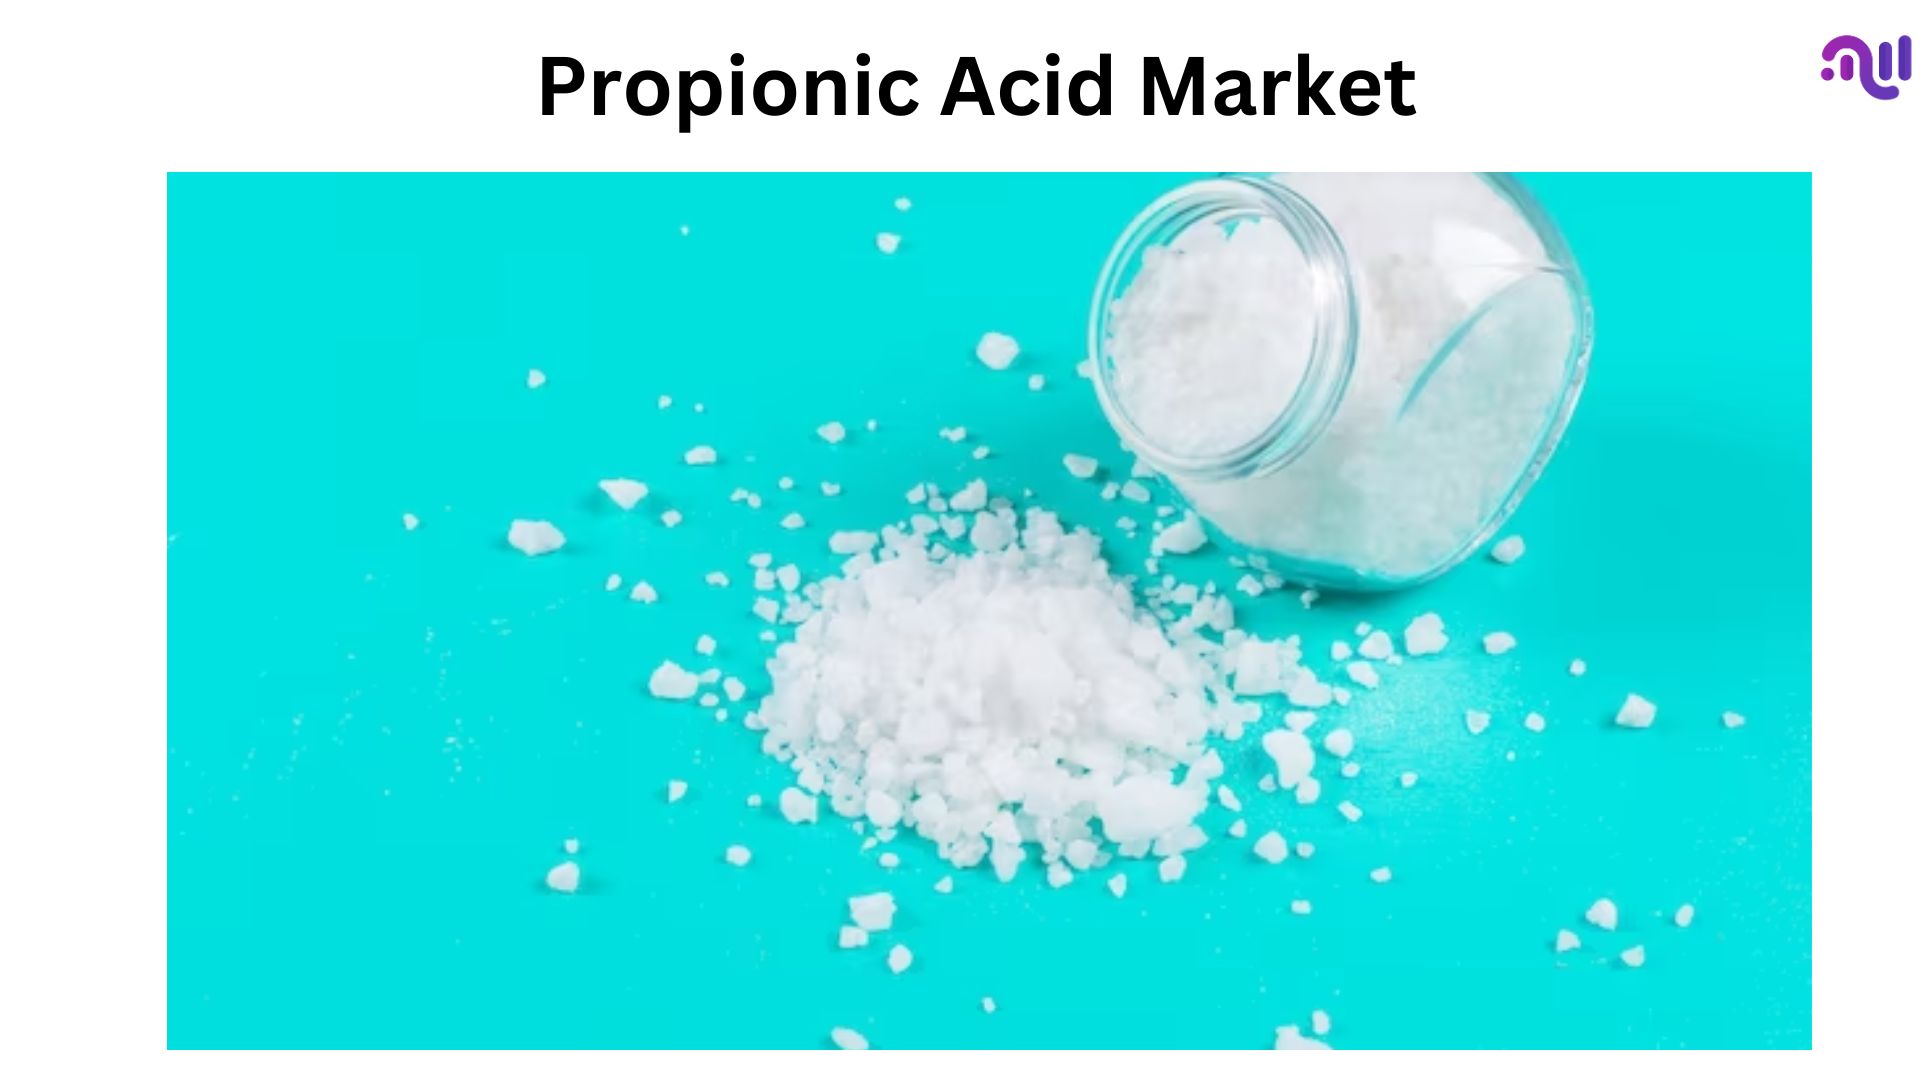 Propionic Acid Market Is Predicted To Reach USD 3.12 Billion In Revenues by 2032 at a CAGR Of 7.3%